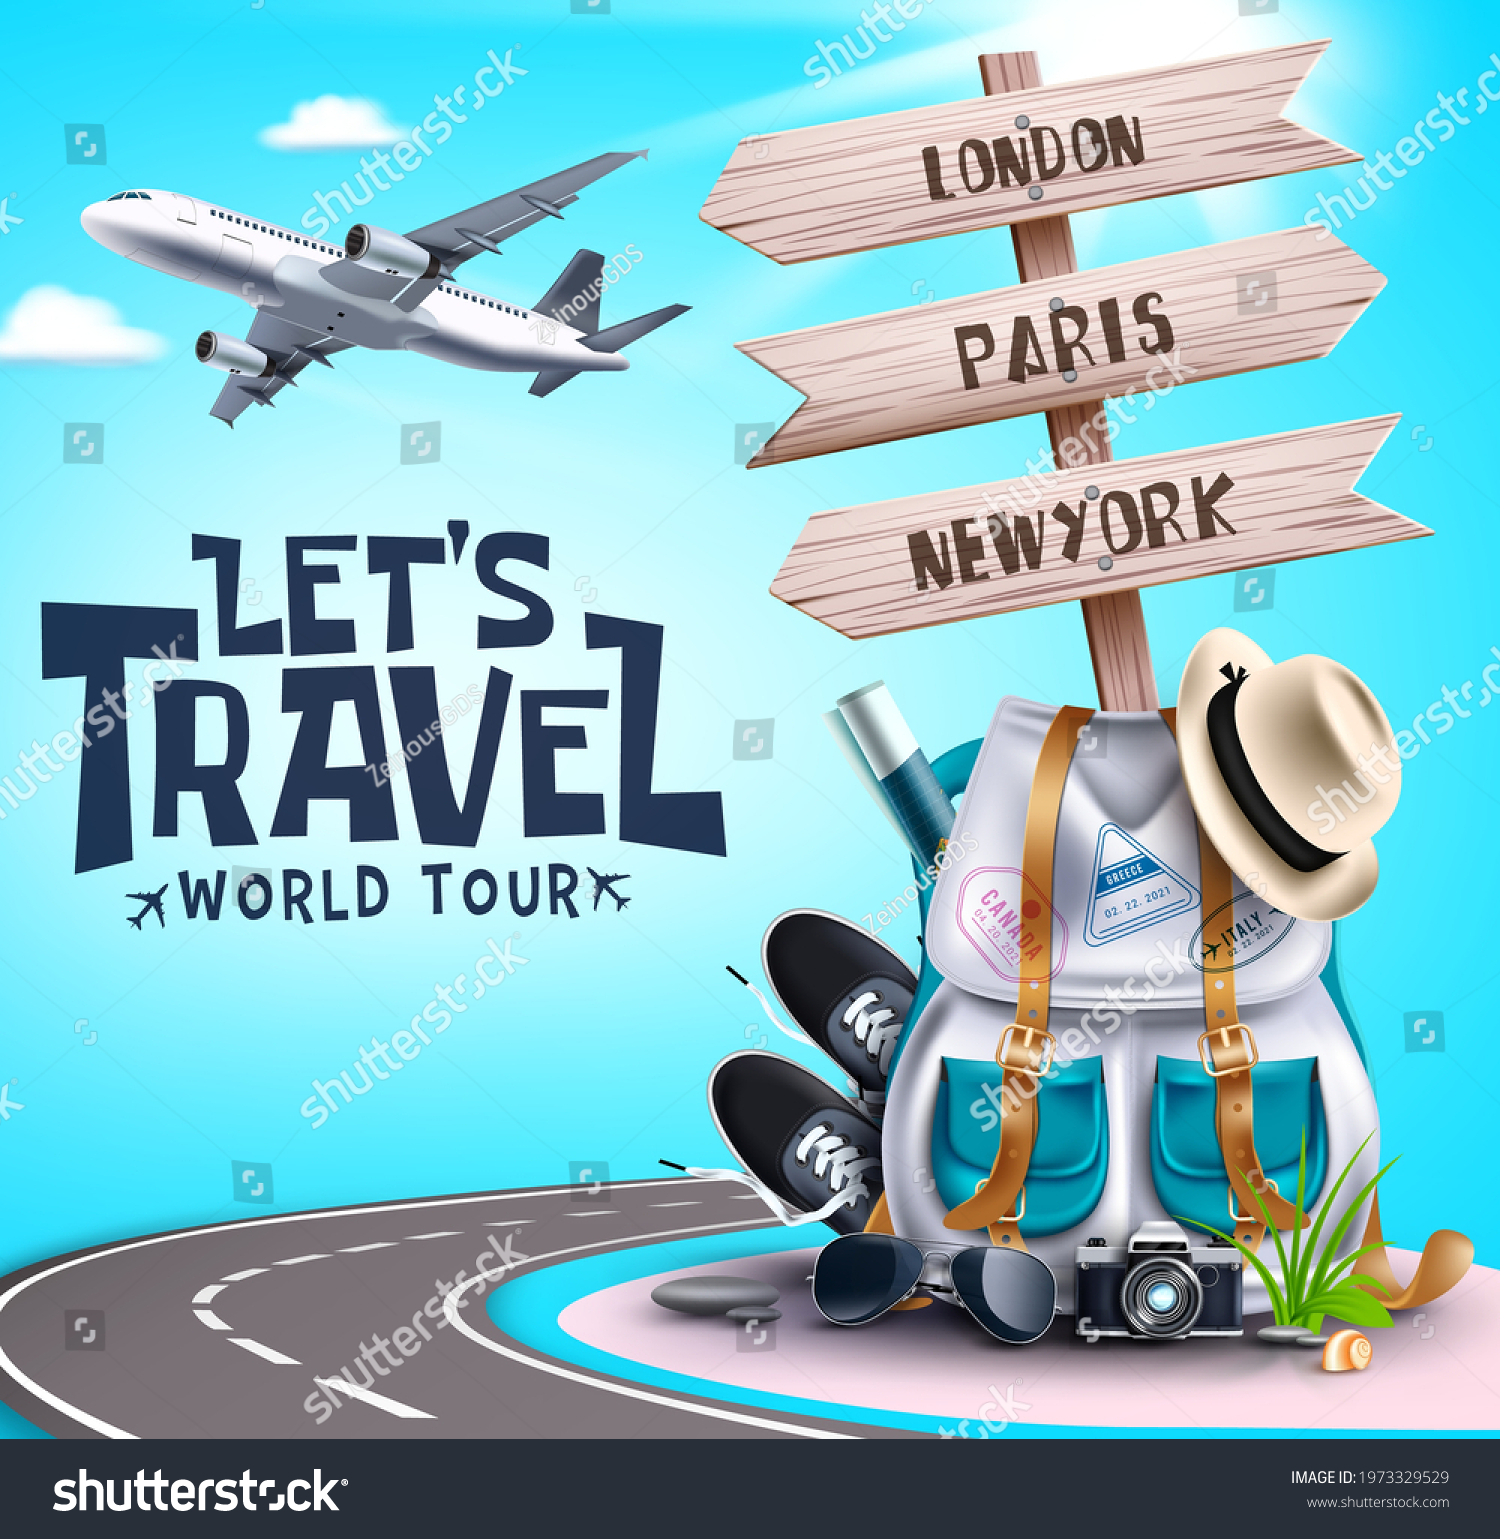 lets travel and tour